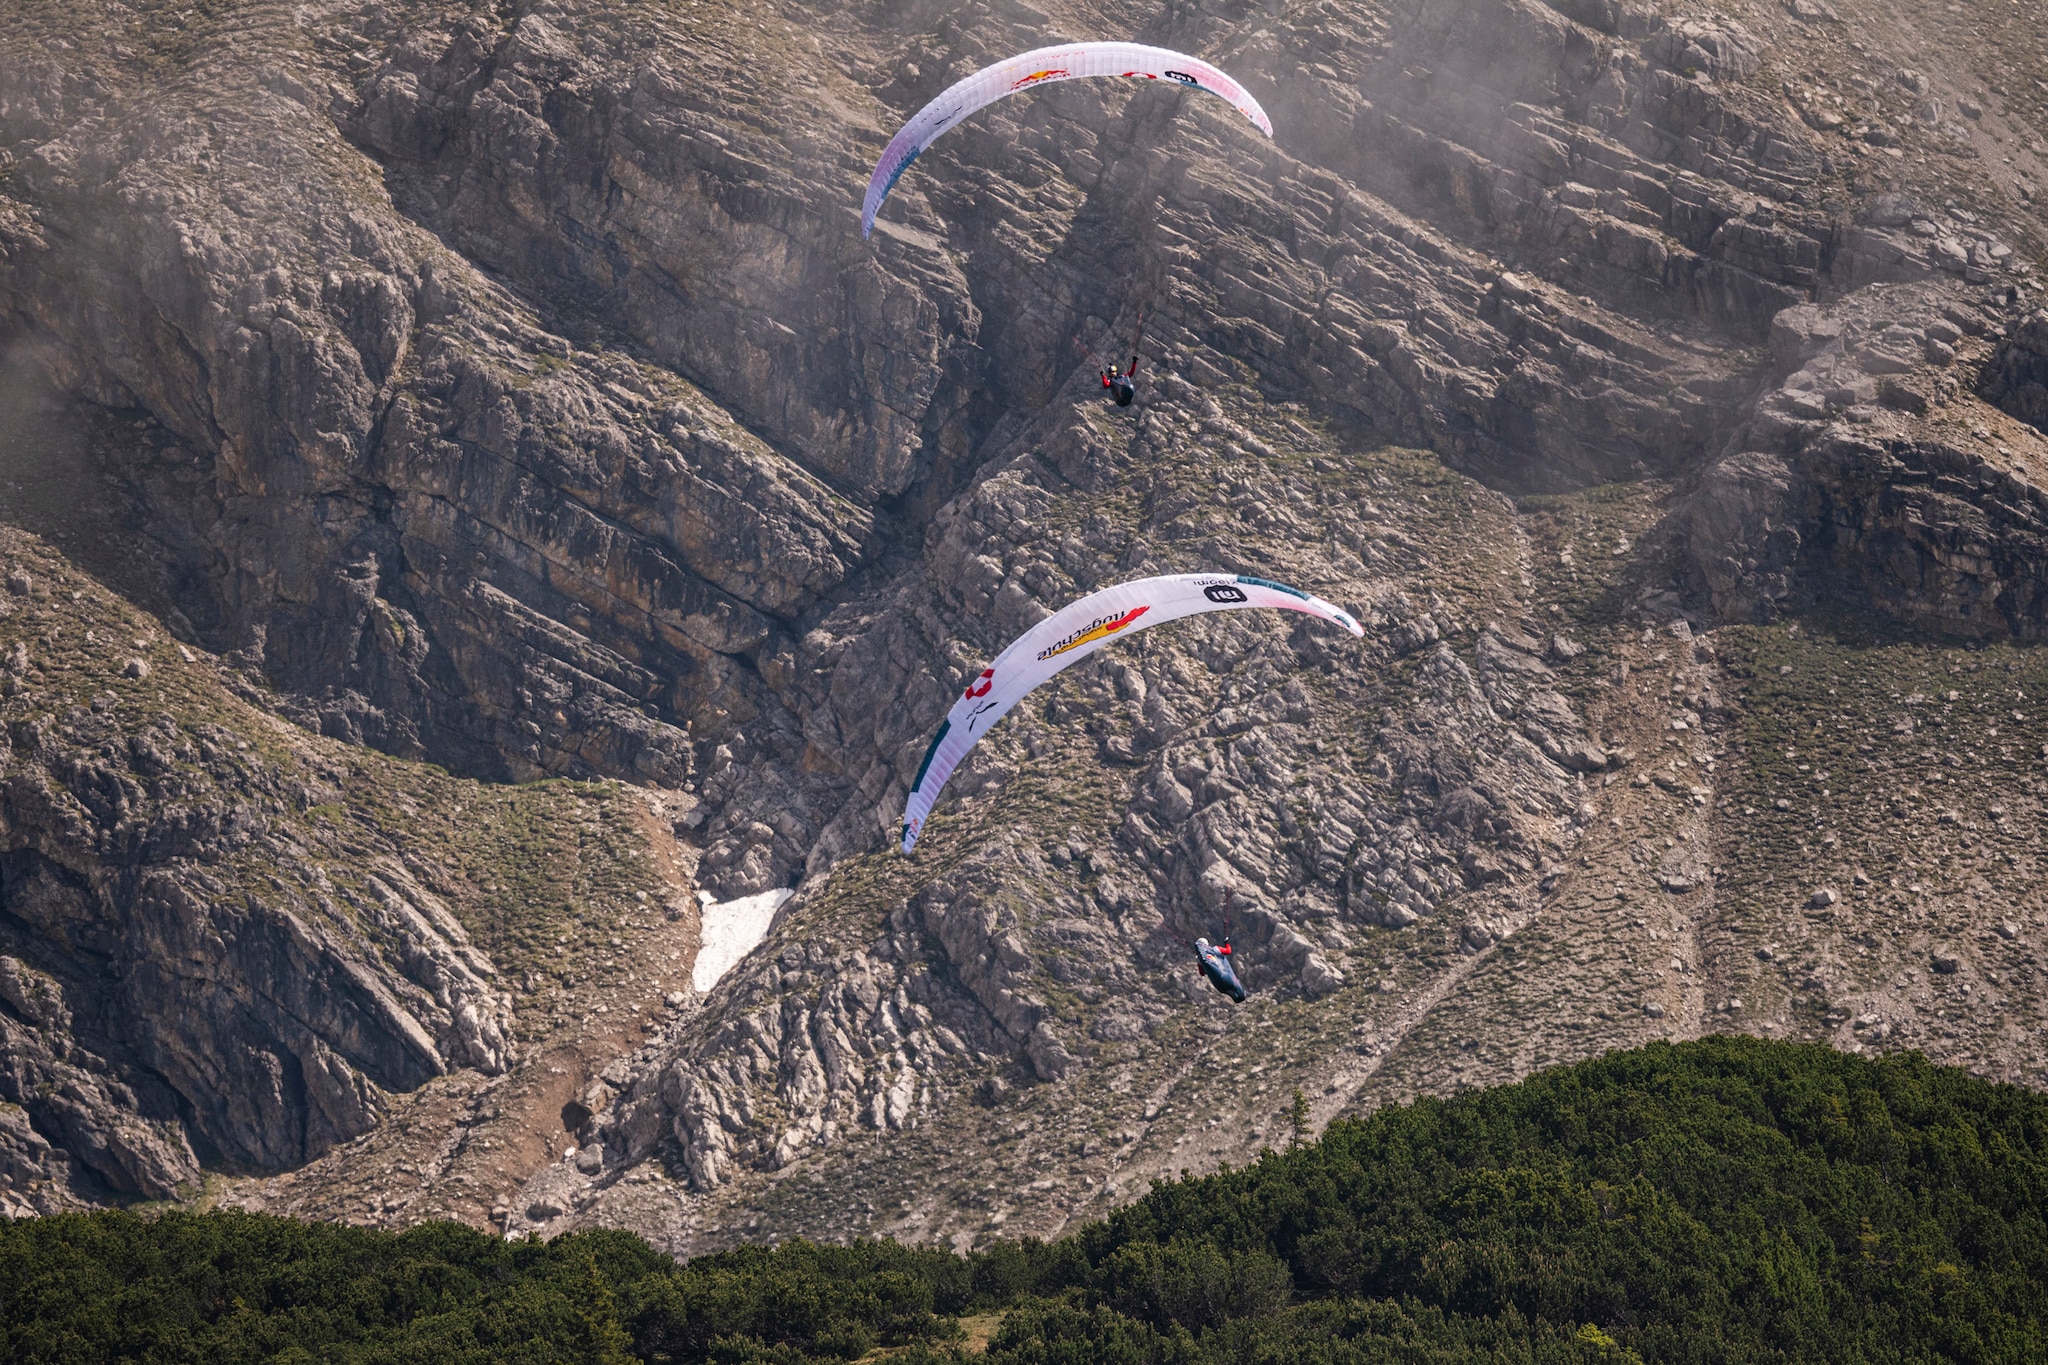 Paul Guschlbauer (AUT1) and Simon Oberrauner (AUT2) performing during the Red Bull X-Alps in Montafon / Austria on 23-June-2021. In this endurance adventure race athletes from 18 nations have to fly with paragliders or hike from Salzburg along the alps towards France, around the Mont Blanc back to Salzburg.